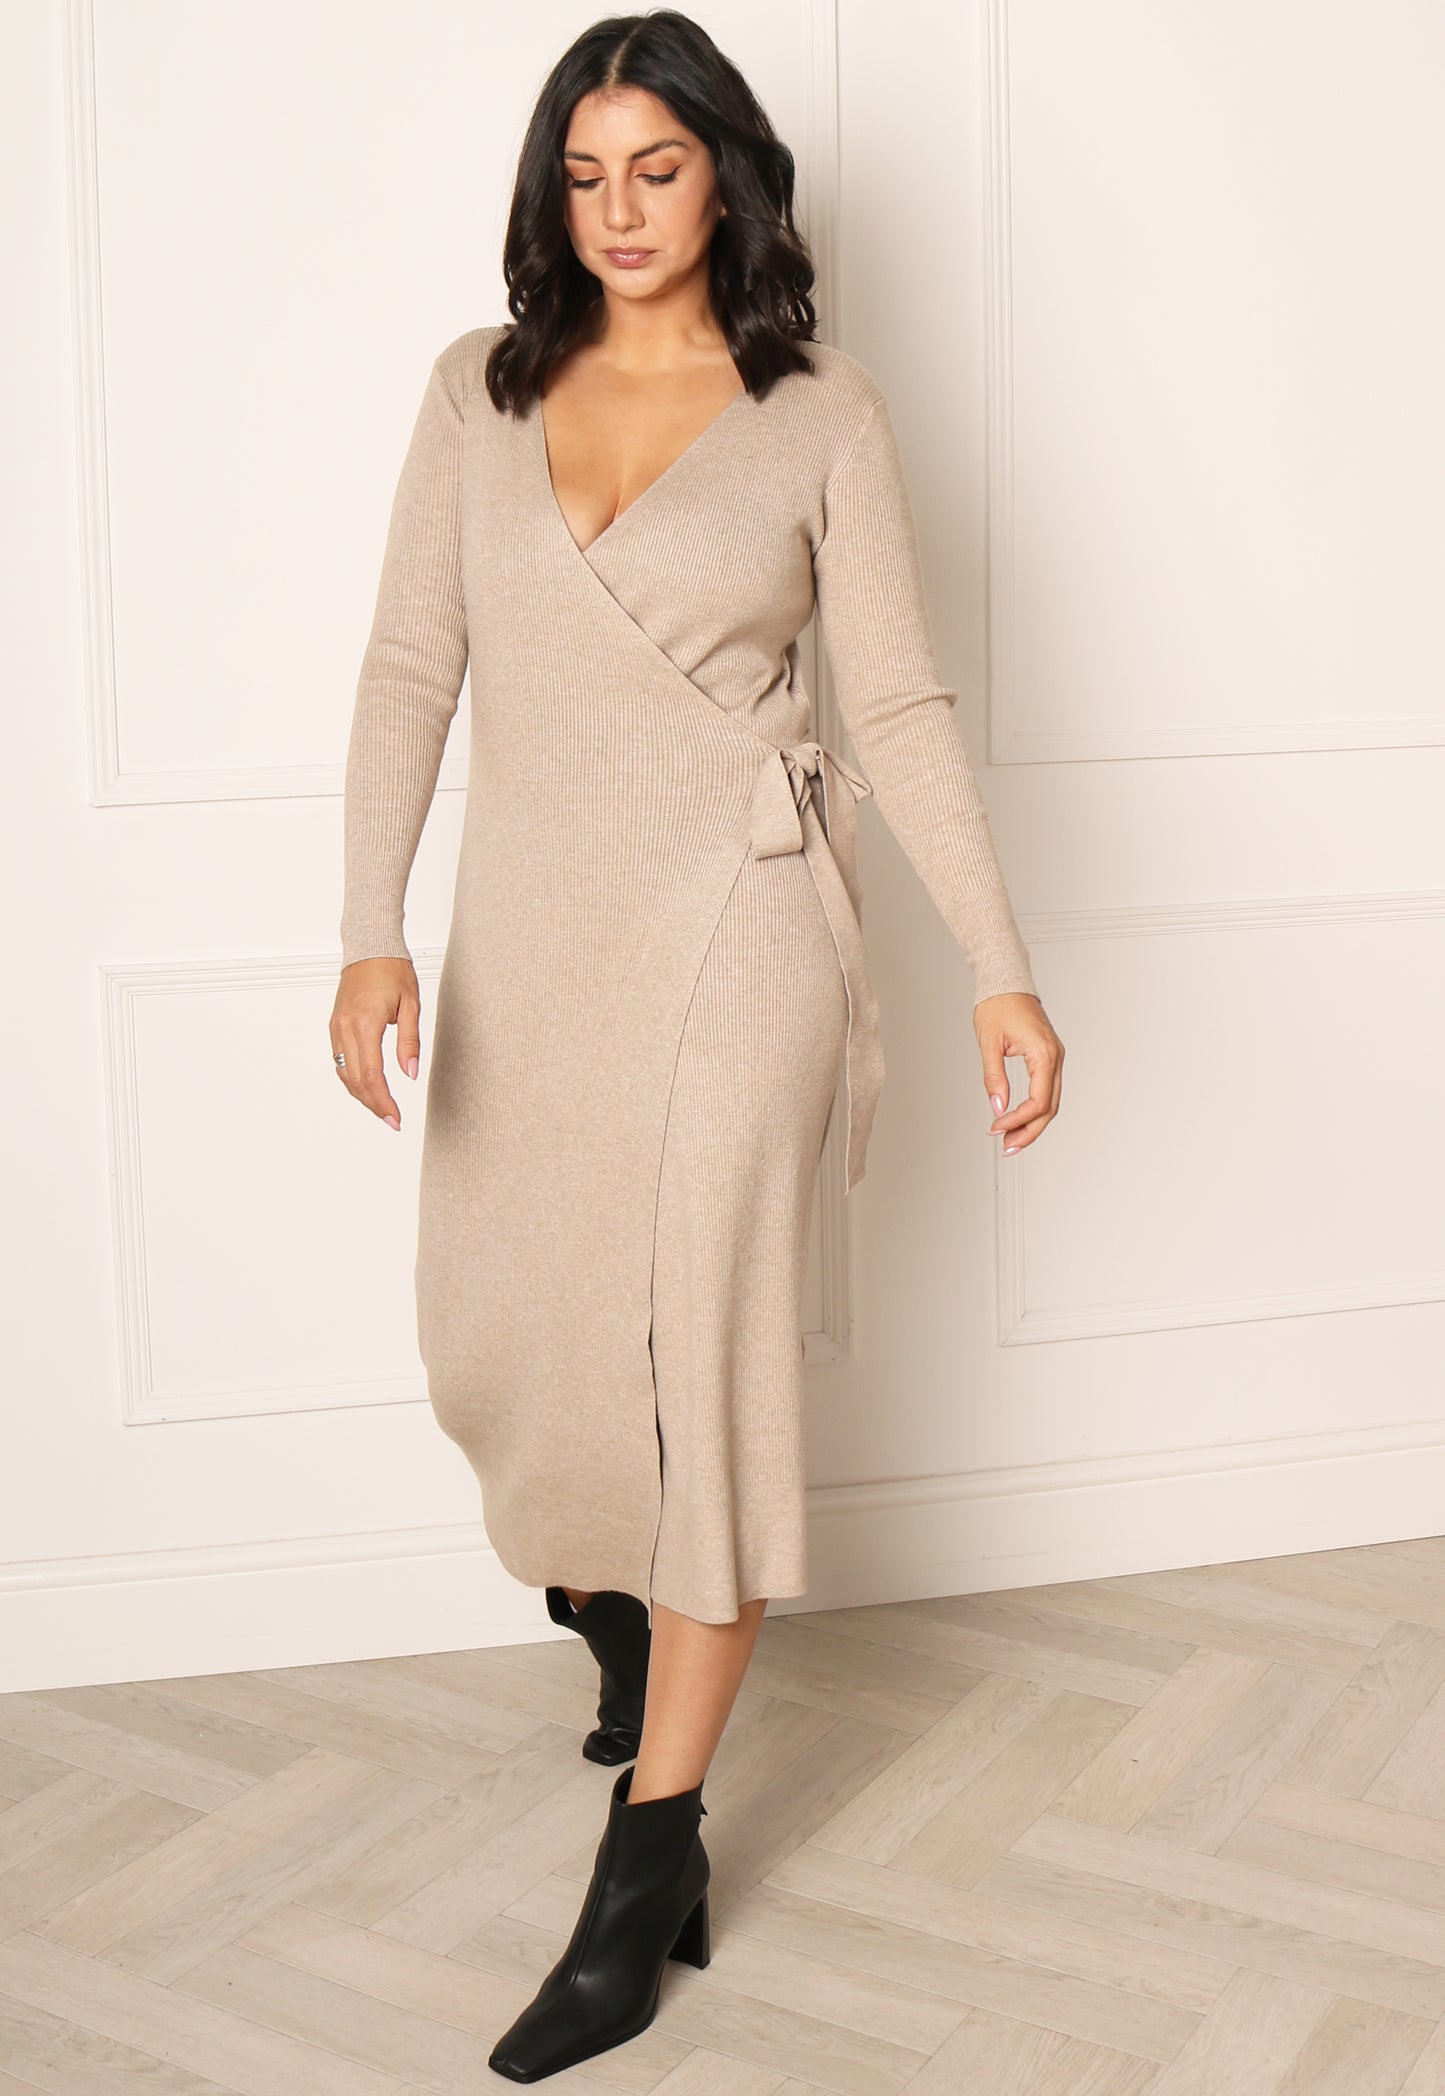 VILA Comfy Luxe Wrap Knitted Ribbed Midi Dress in Natural Melange - One Nation Clothing